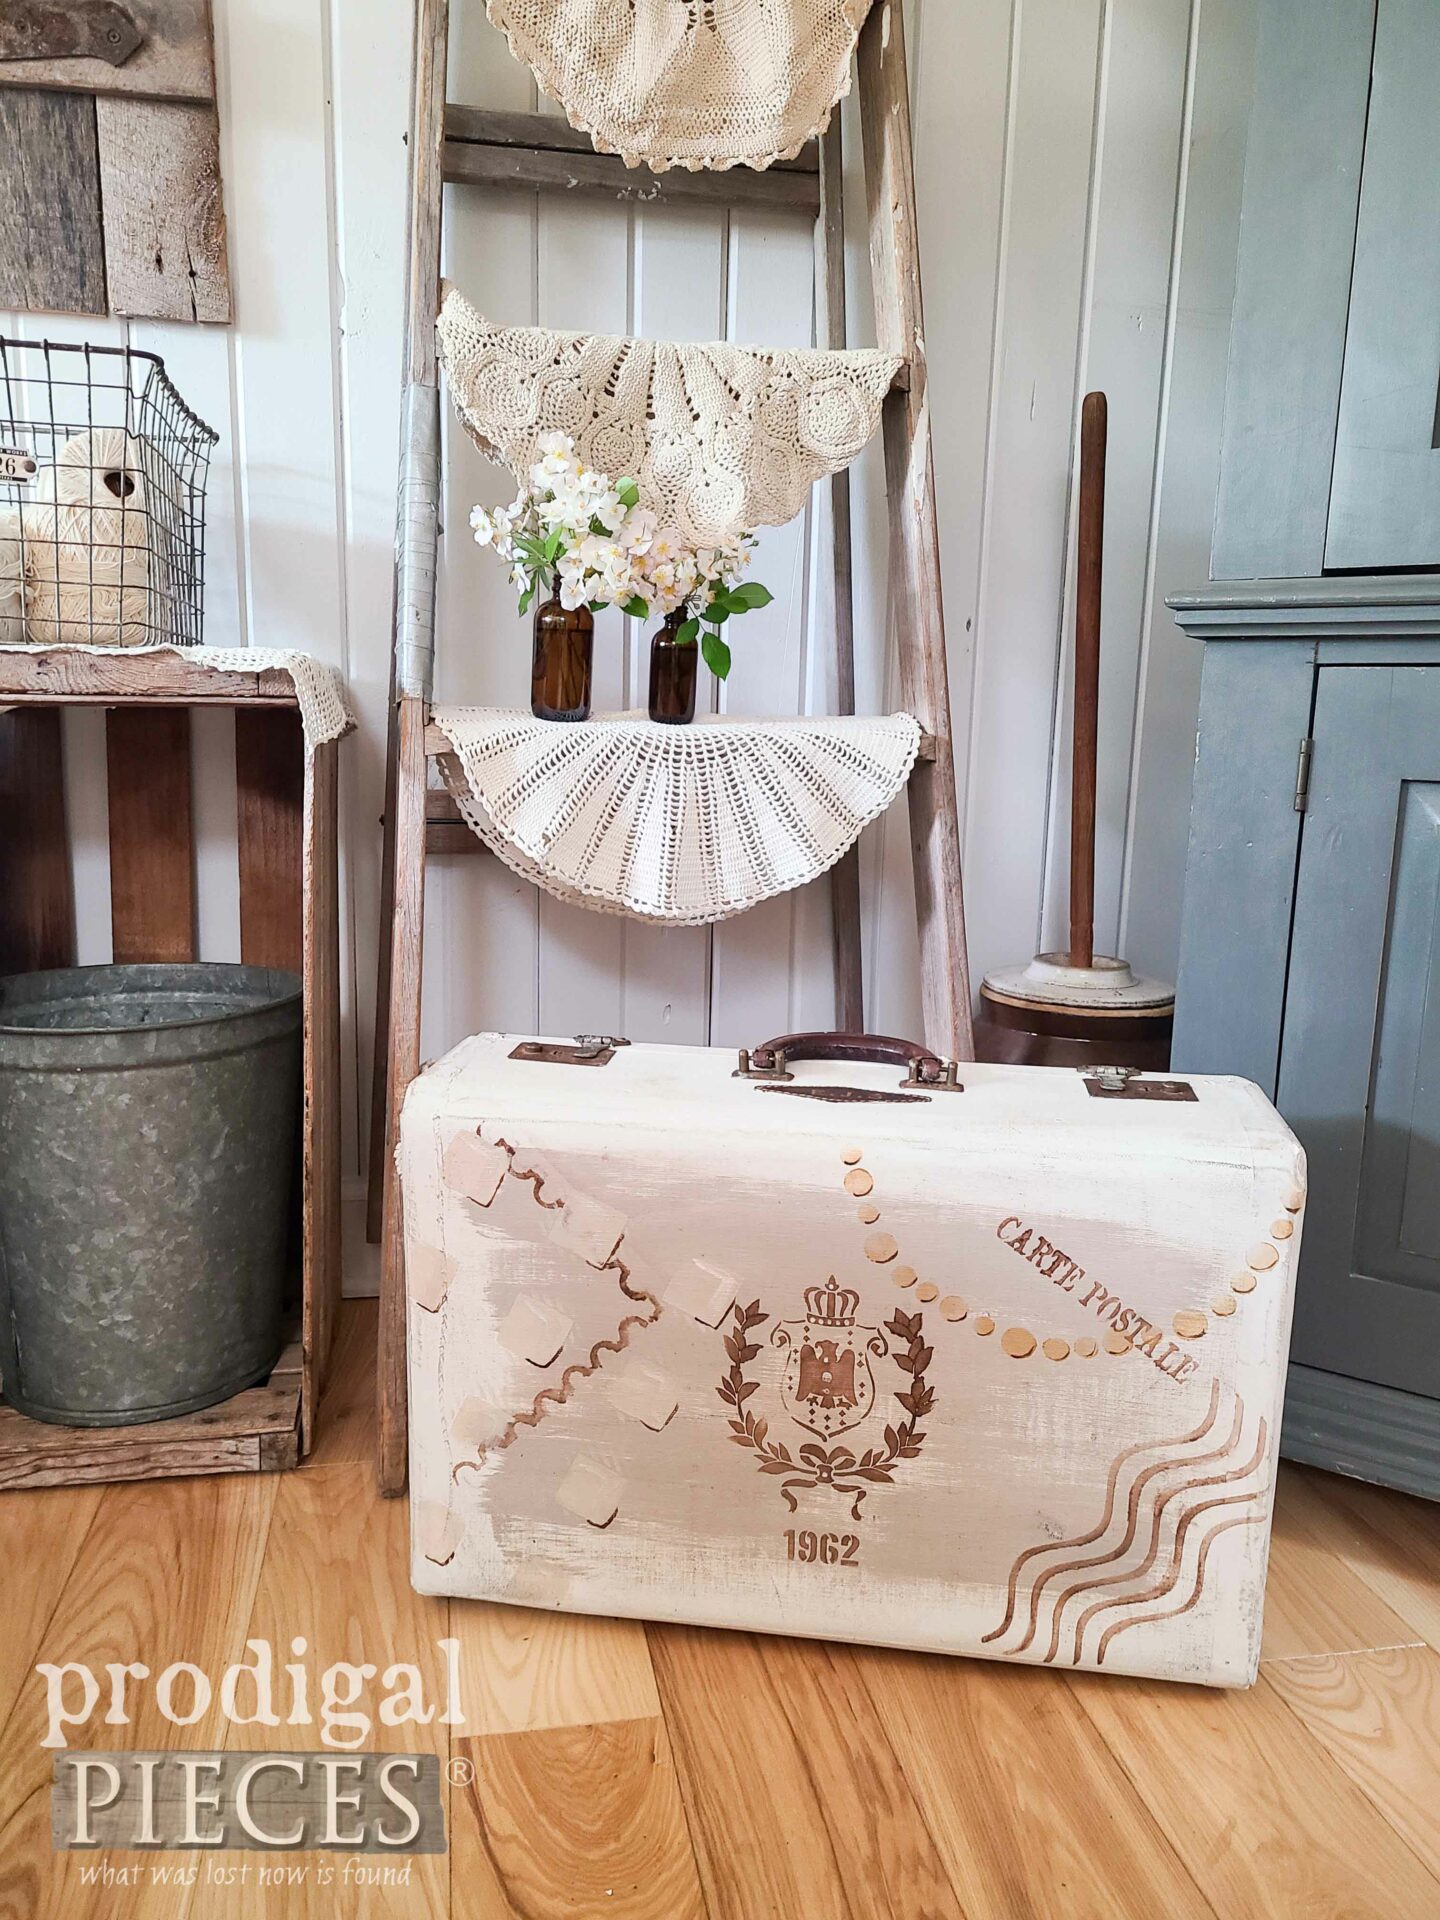 DIY French Chic Style Vintage Painted Luggage Suitcase by Larissa of Prodigal Pieces | prodigalpieces.com #prodigalpieces #french #chic #diy